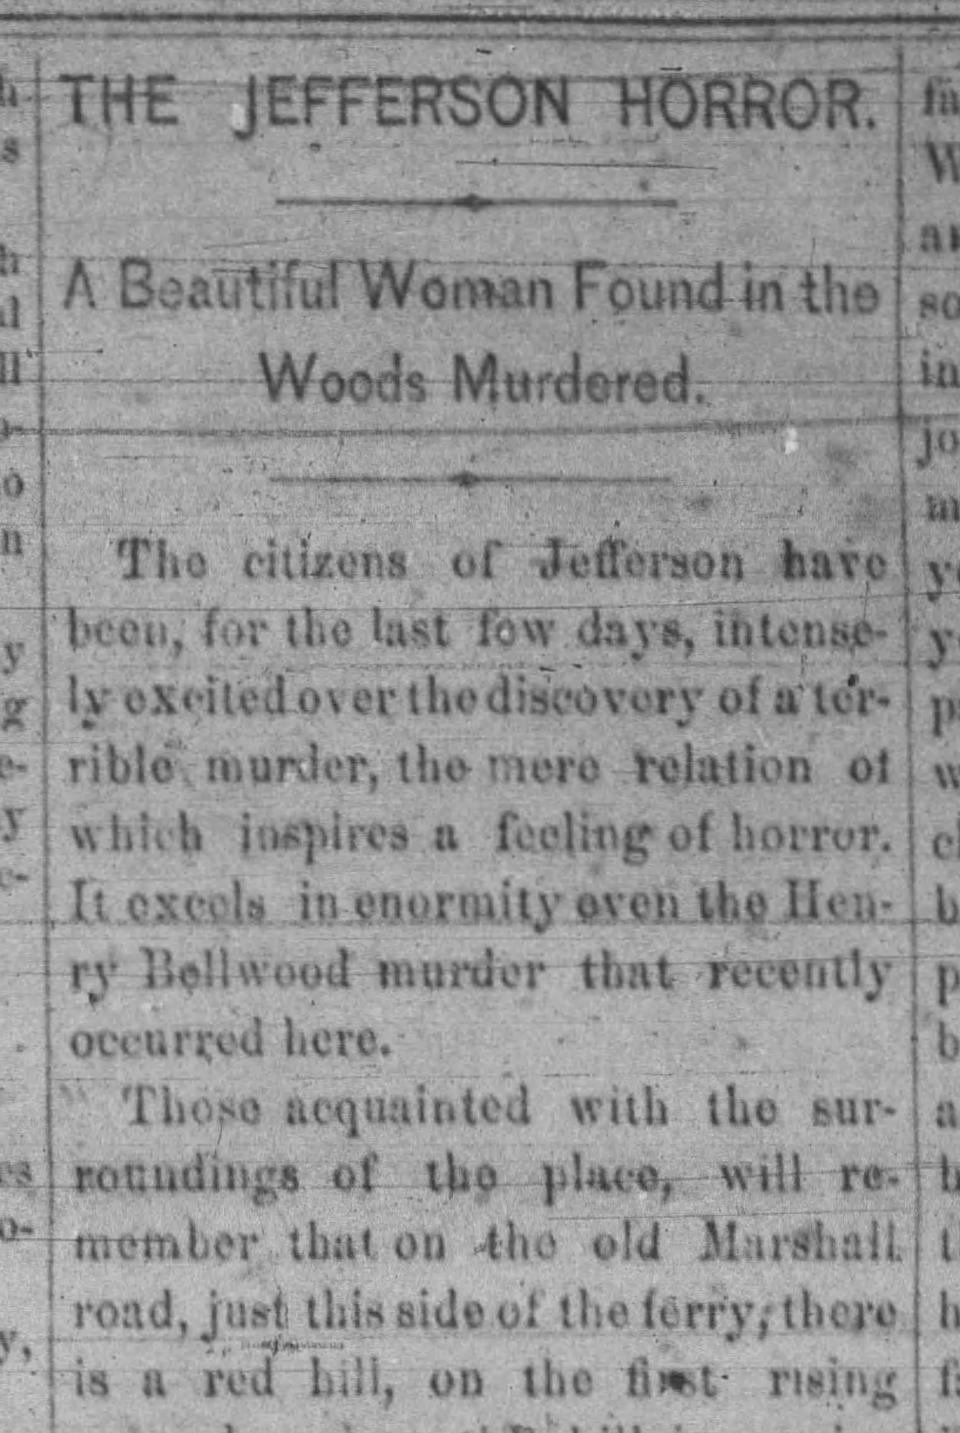 The Tri-Weekly Herald of Marshall, Texas, reported on the discovery of slain "Diamond Bessie" Moore on Feb. 10, 1877. Abe Rothschild, scion of a wealthy Cincinnati family, was the only suspect in the case.